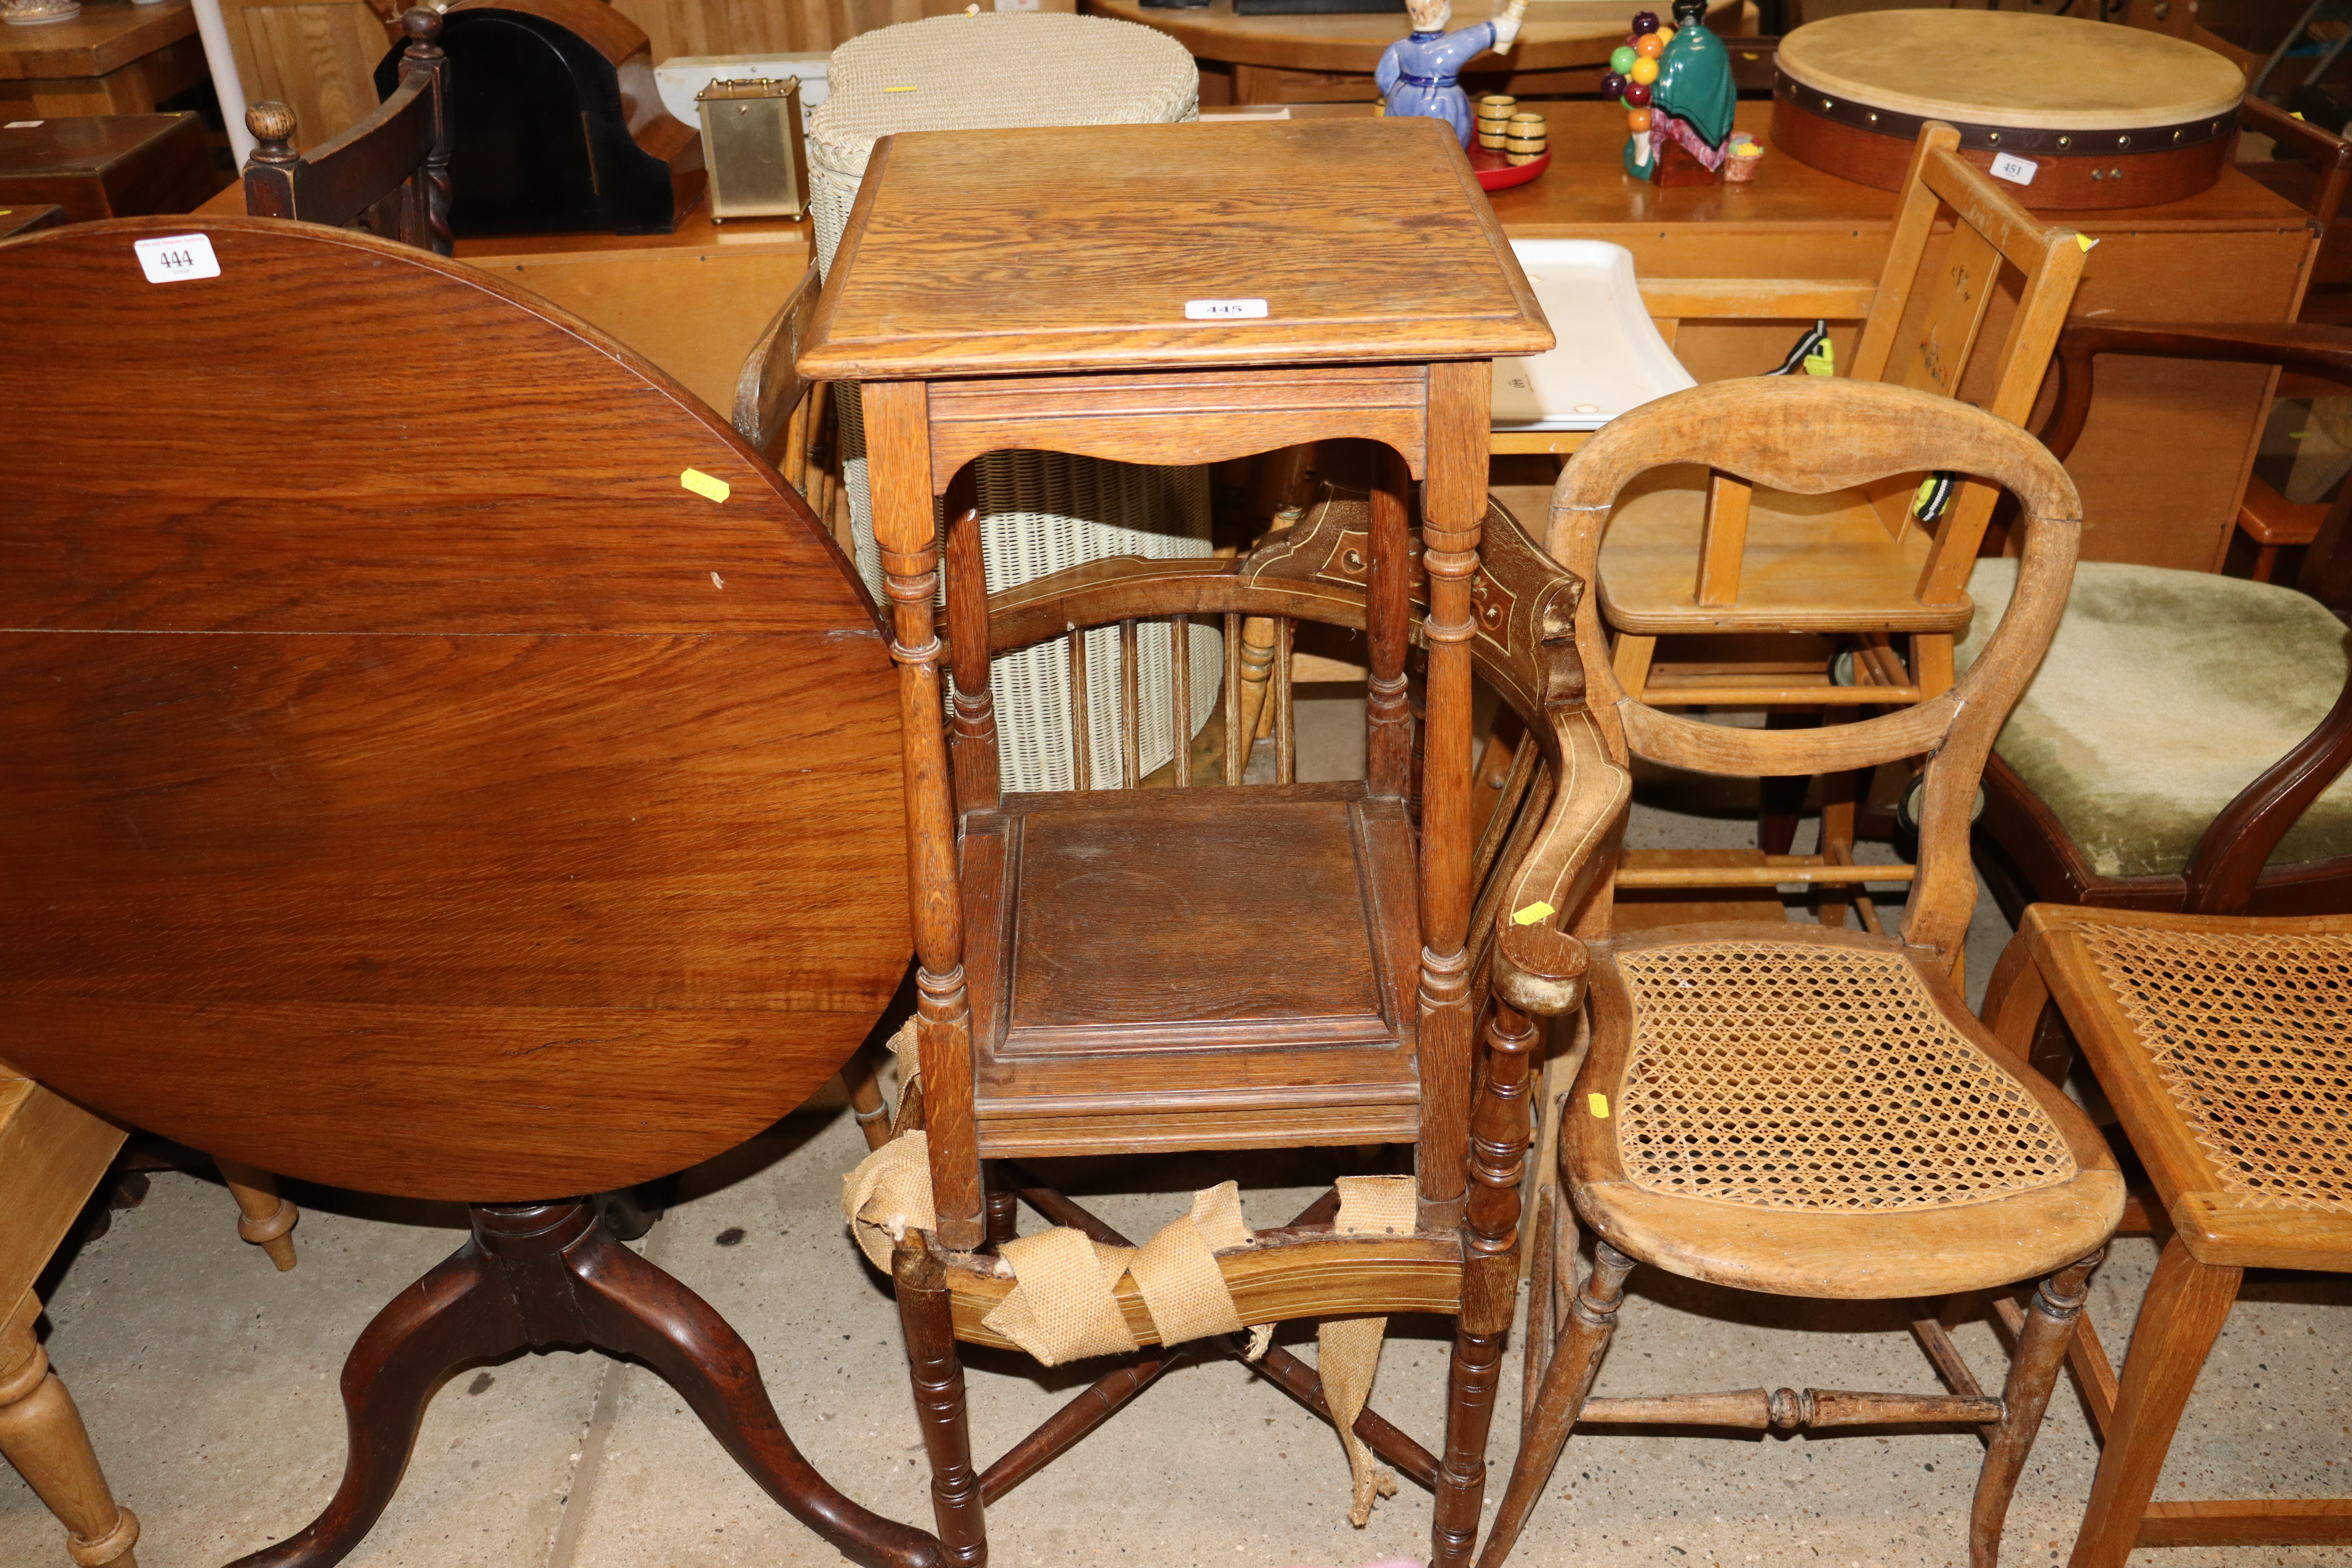 An Edwardian corner chair and an oak side table